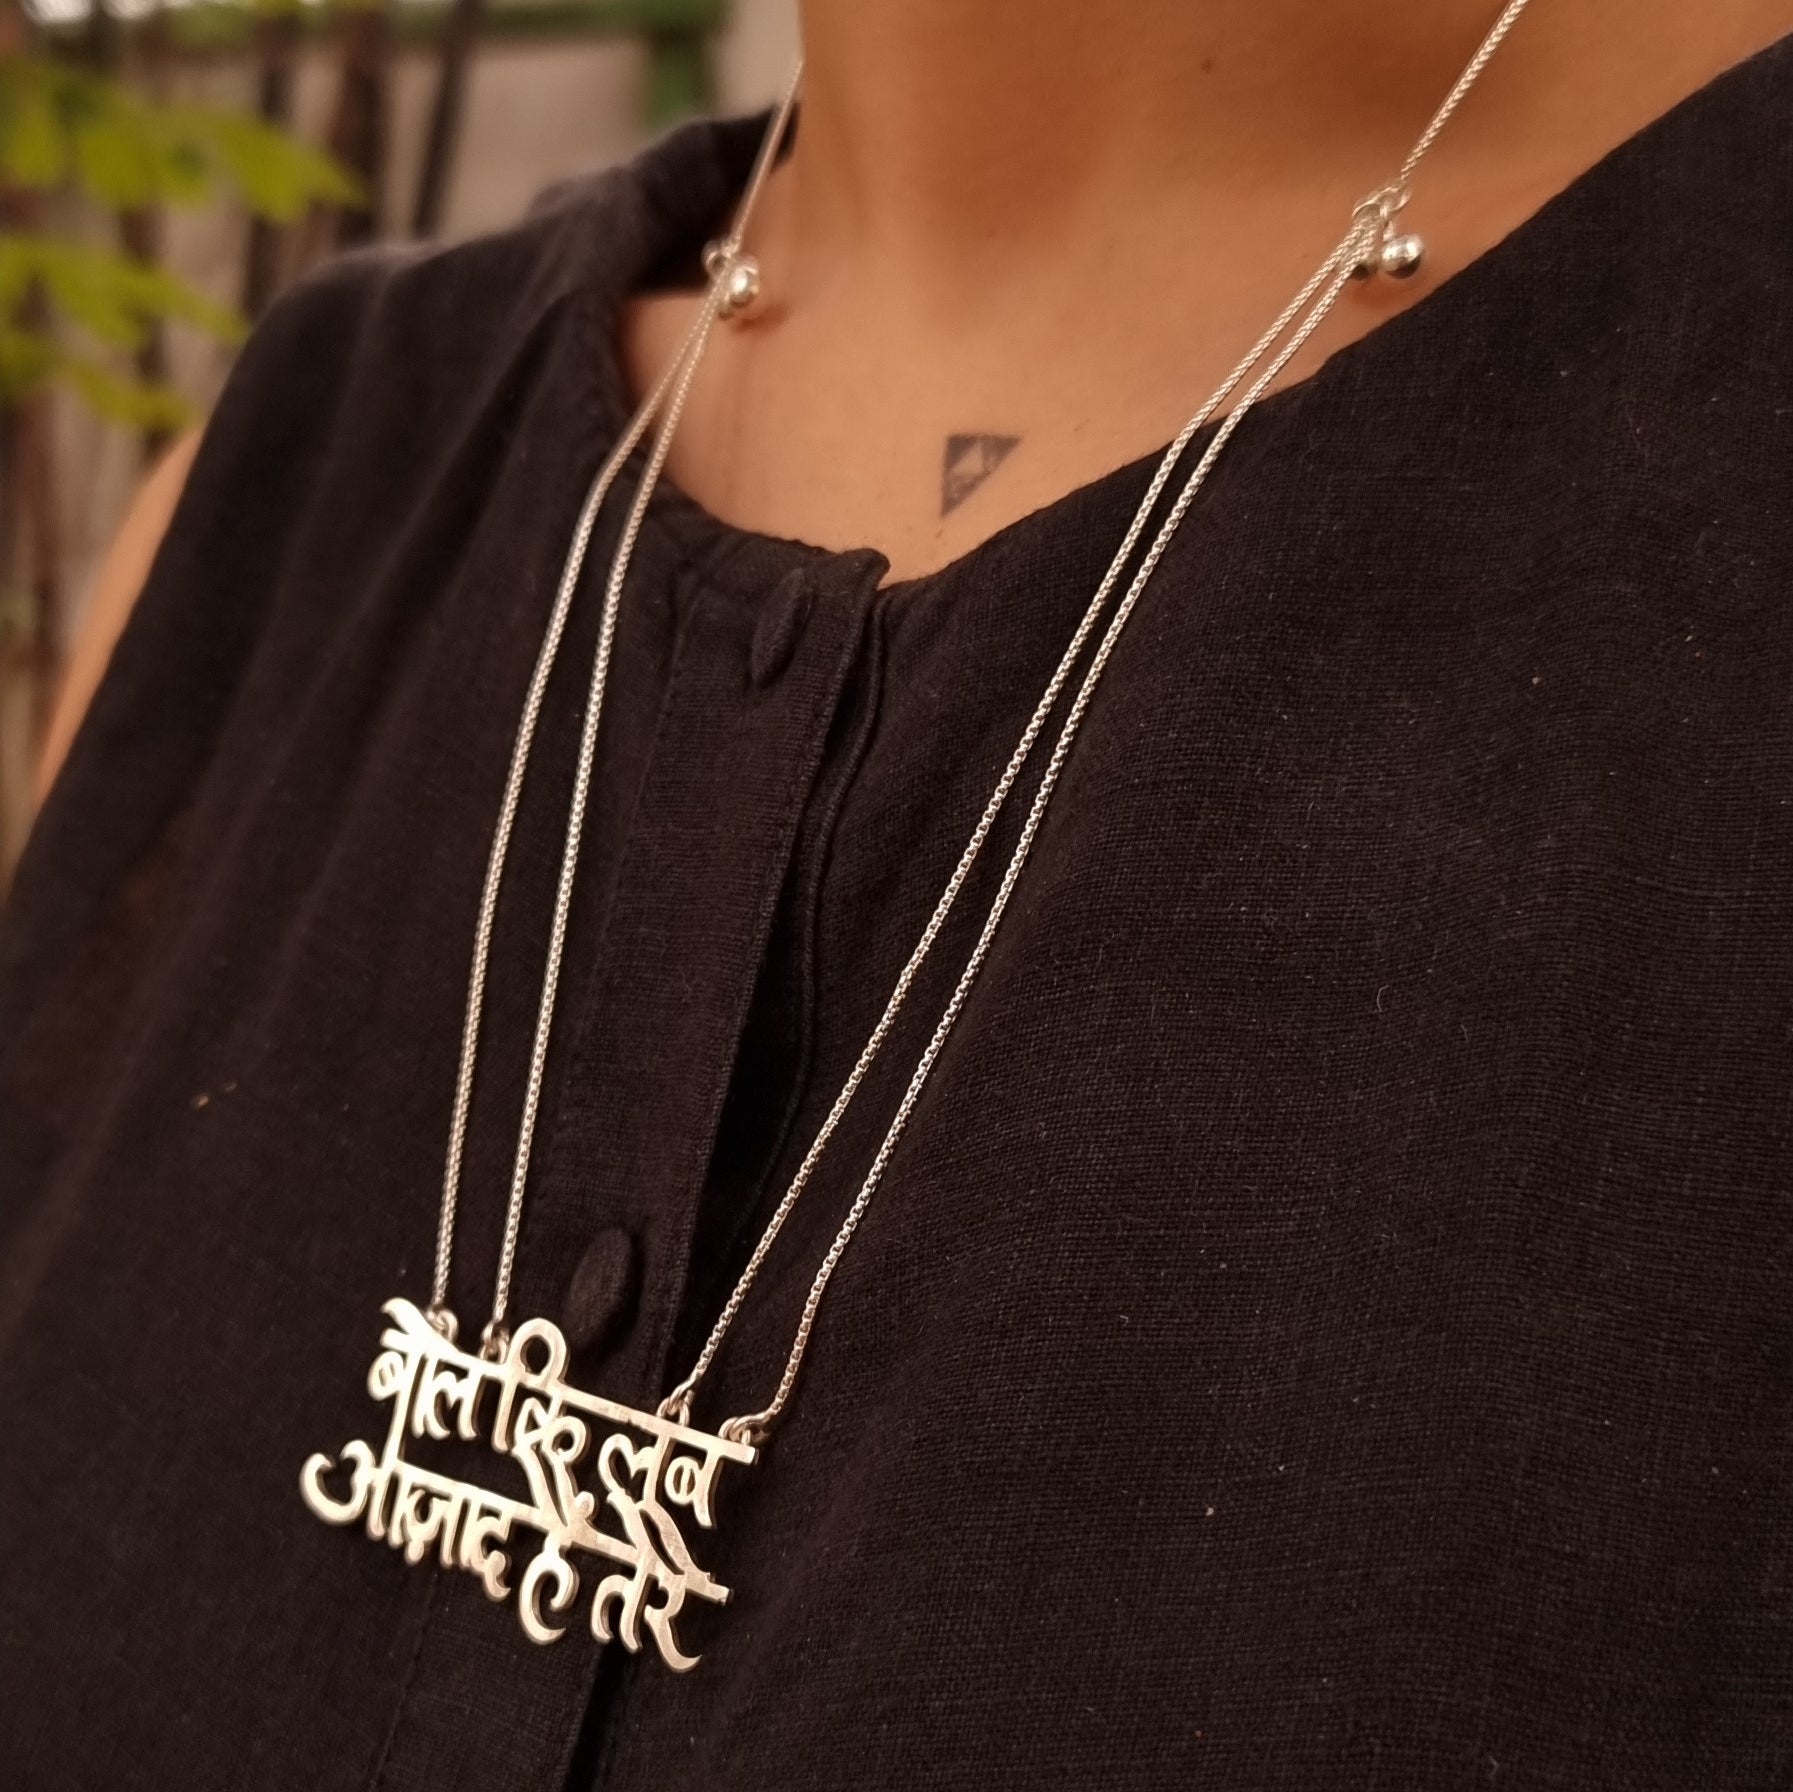 Lab Azaad Hai Tere Necklace by Quirksmith - Featured on Shark Tank India Season 3 | Sterling Silver Jewelry